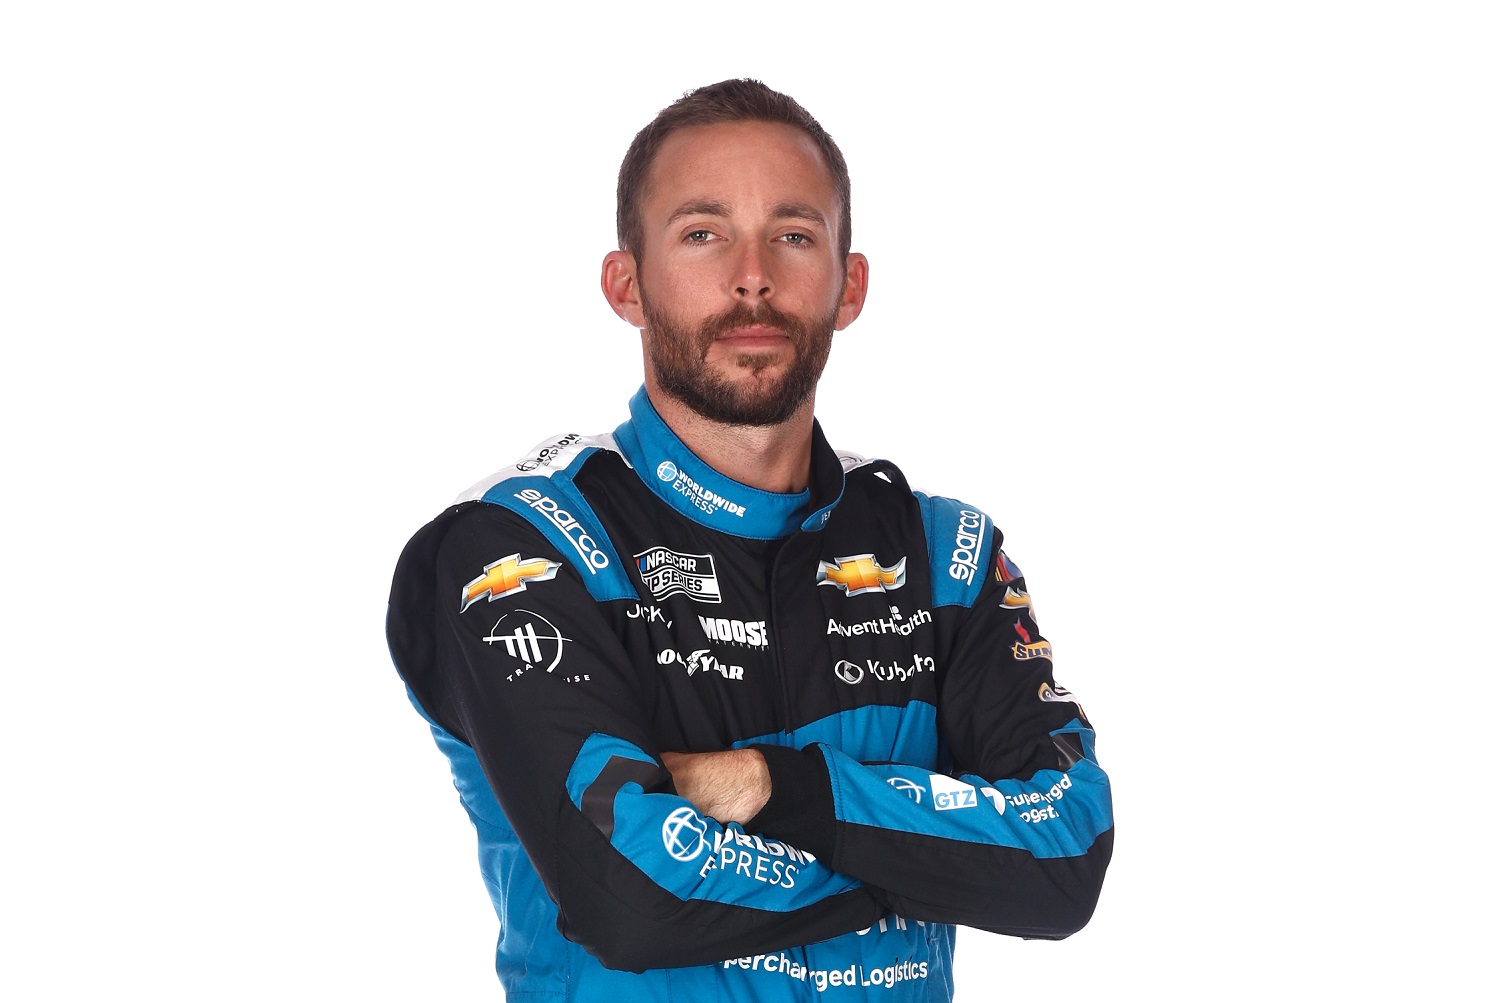 NASCAR driver Ross Chastain poses for a photo during NASCAR Production Days at Charlotte Convention Center on Jan. 18, 2023. | Chris Graythen/Getty Images